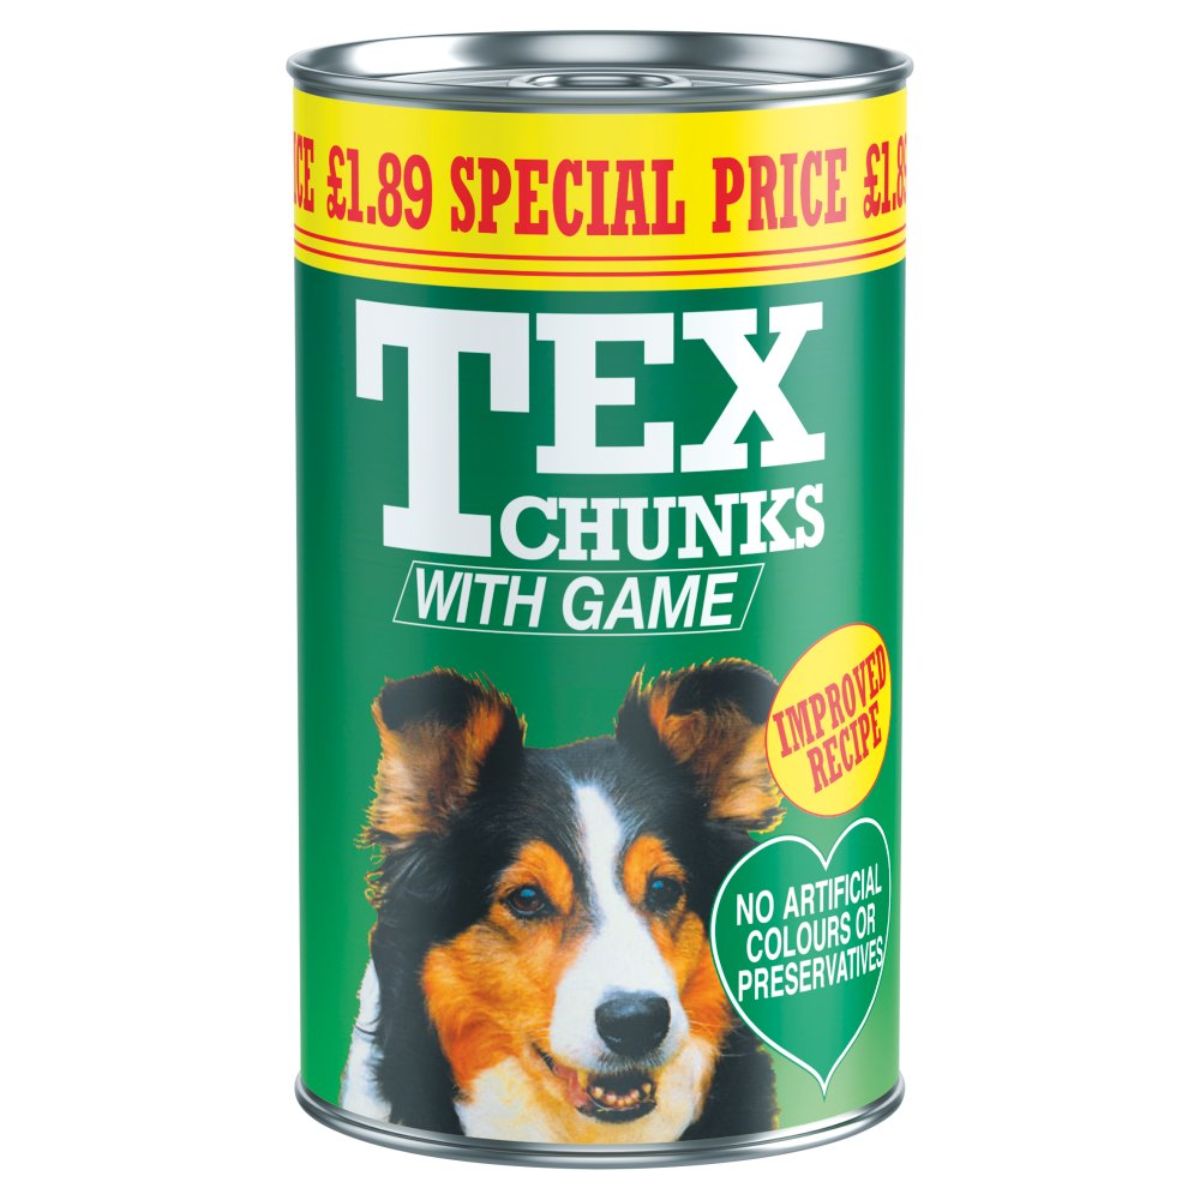 A can of Tex - Chunks with Game - 1.2kg dog food.